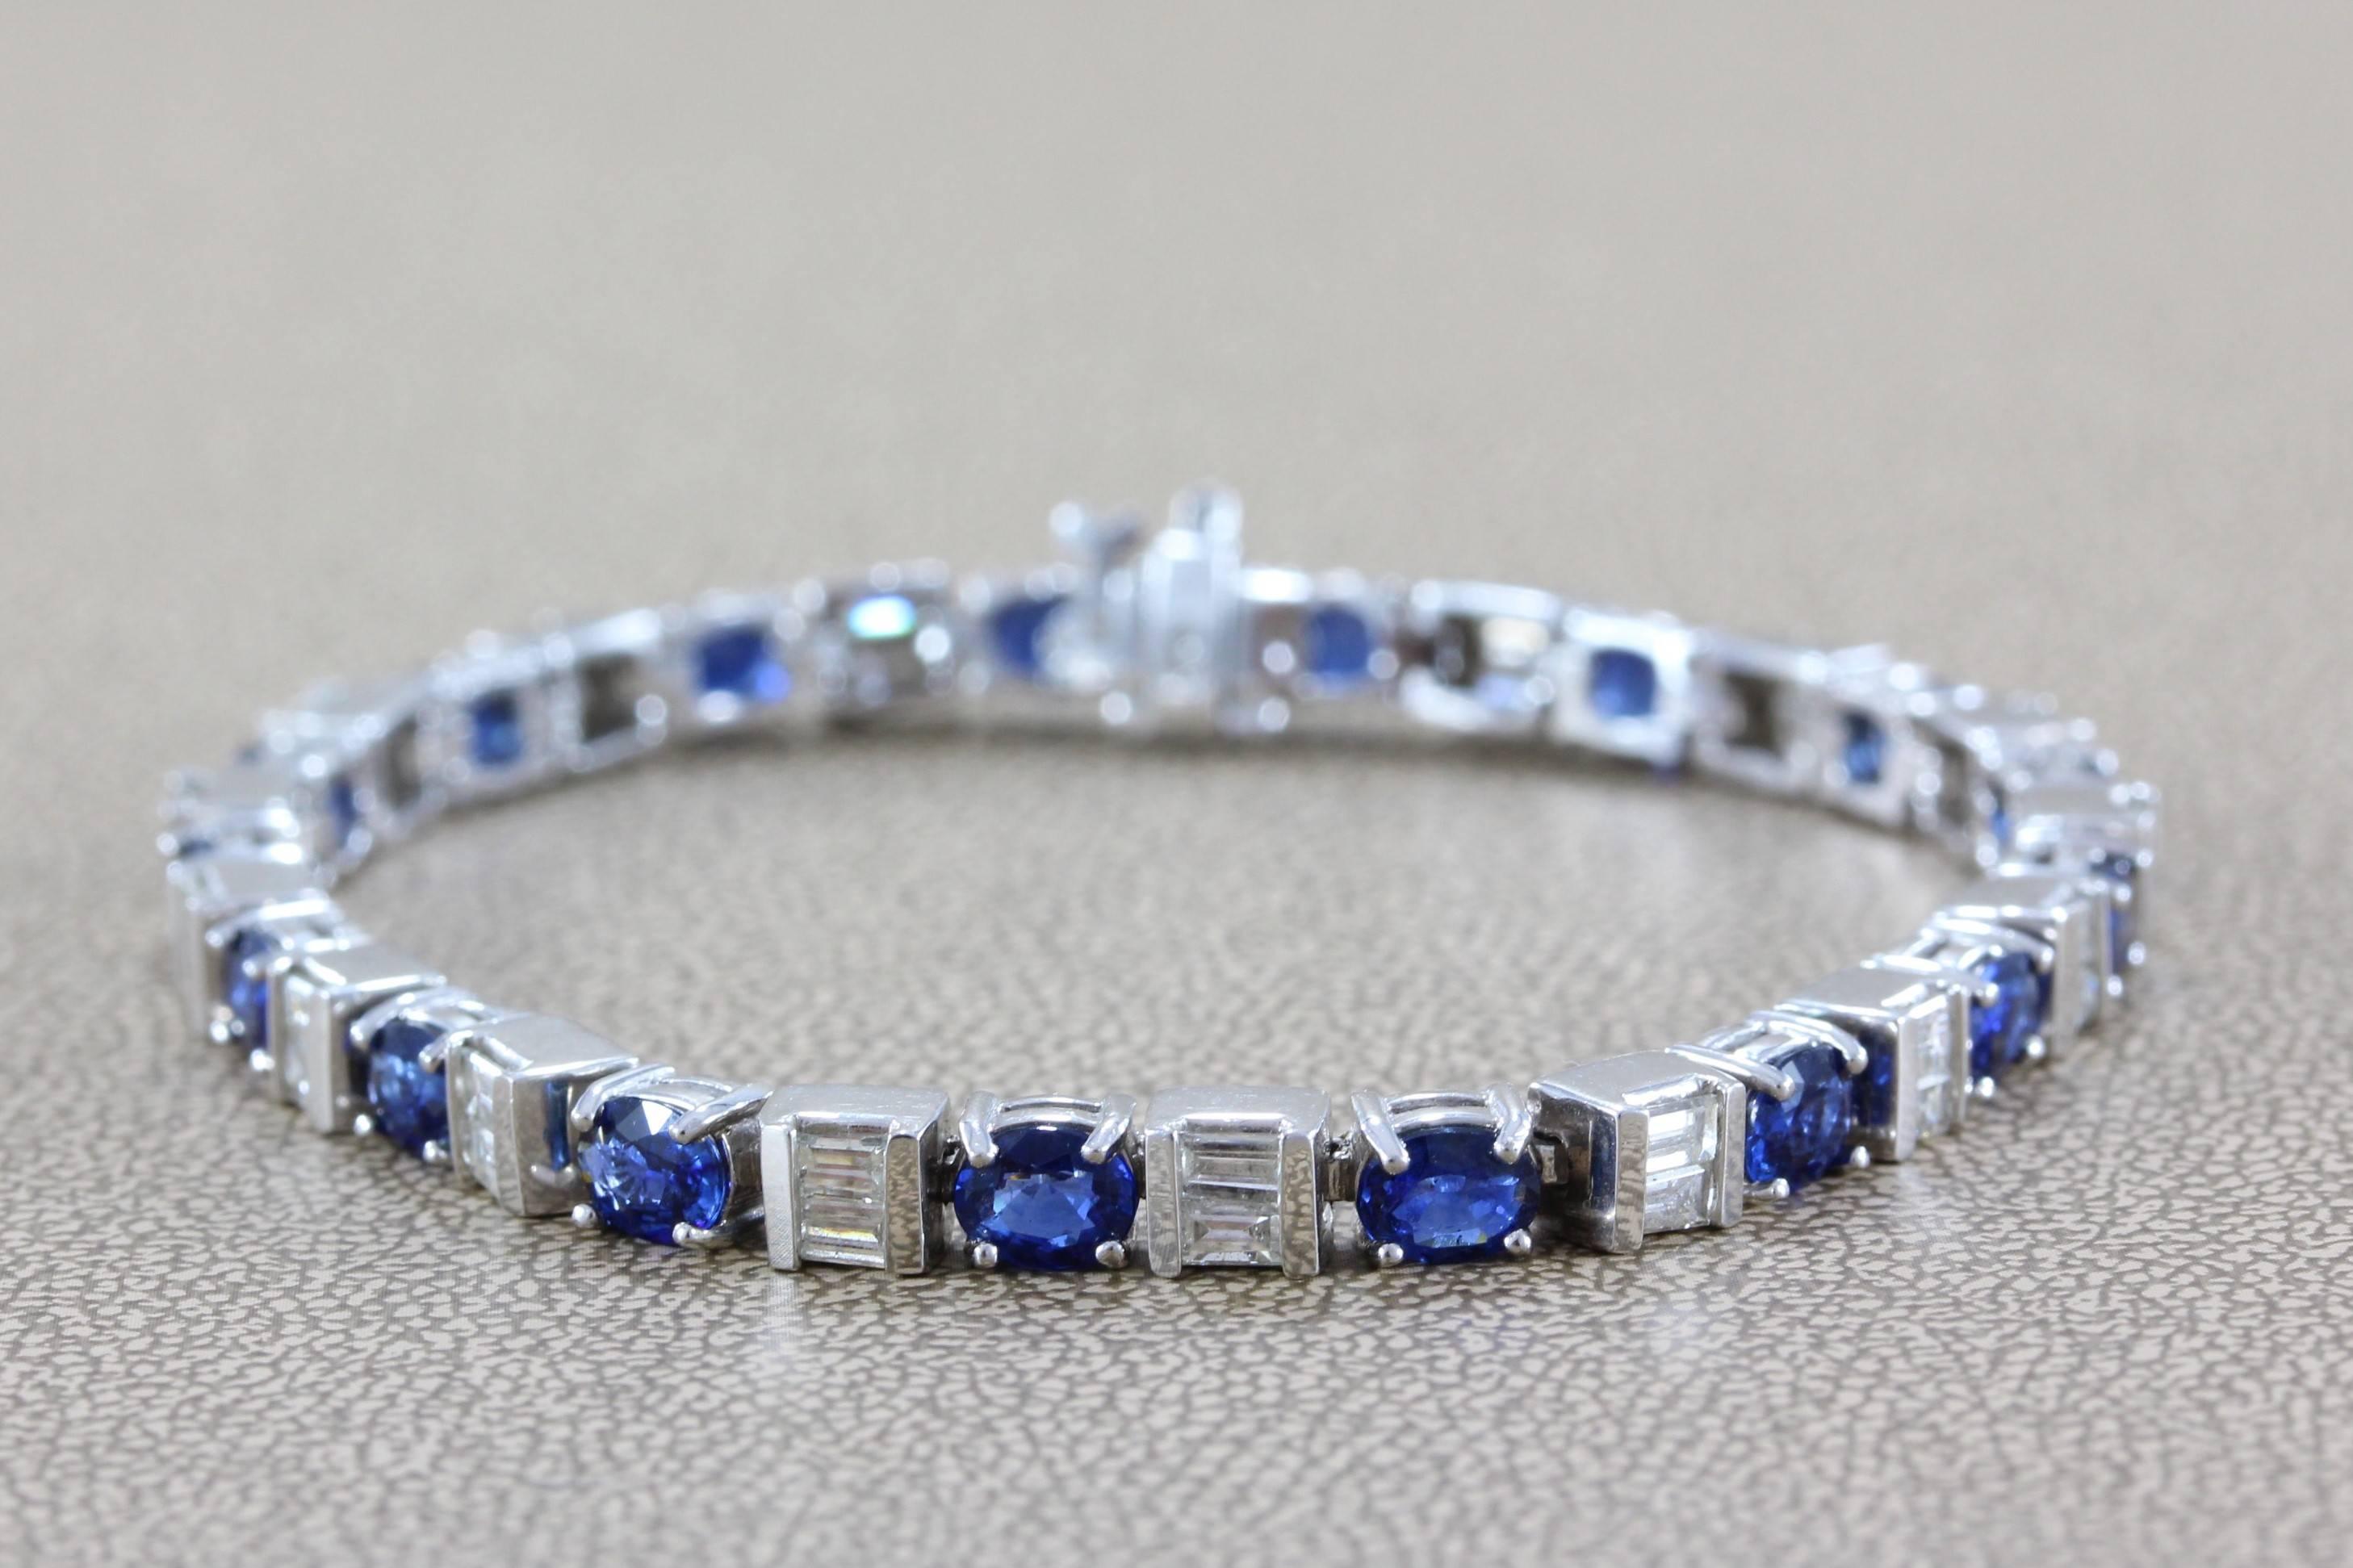 7.01 carats of super gem quality oval blue sapphires alternating with 2.68 carats of baguette diamonds.  The sapphires are prong set and the diamonds are bezel set in 14K white gold.

Length: 7 inches
